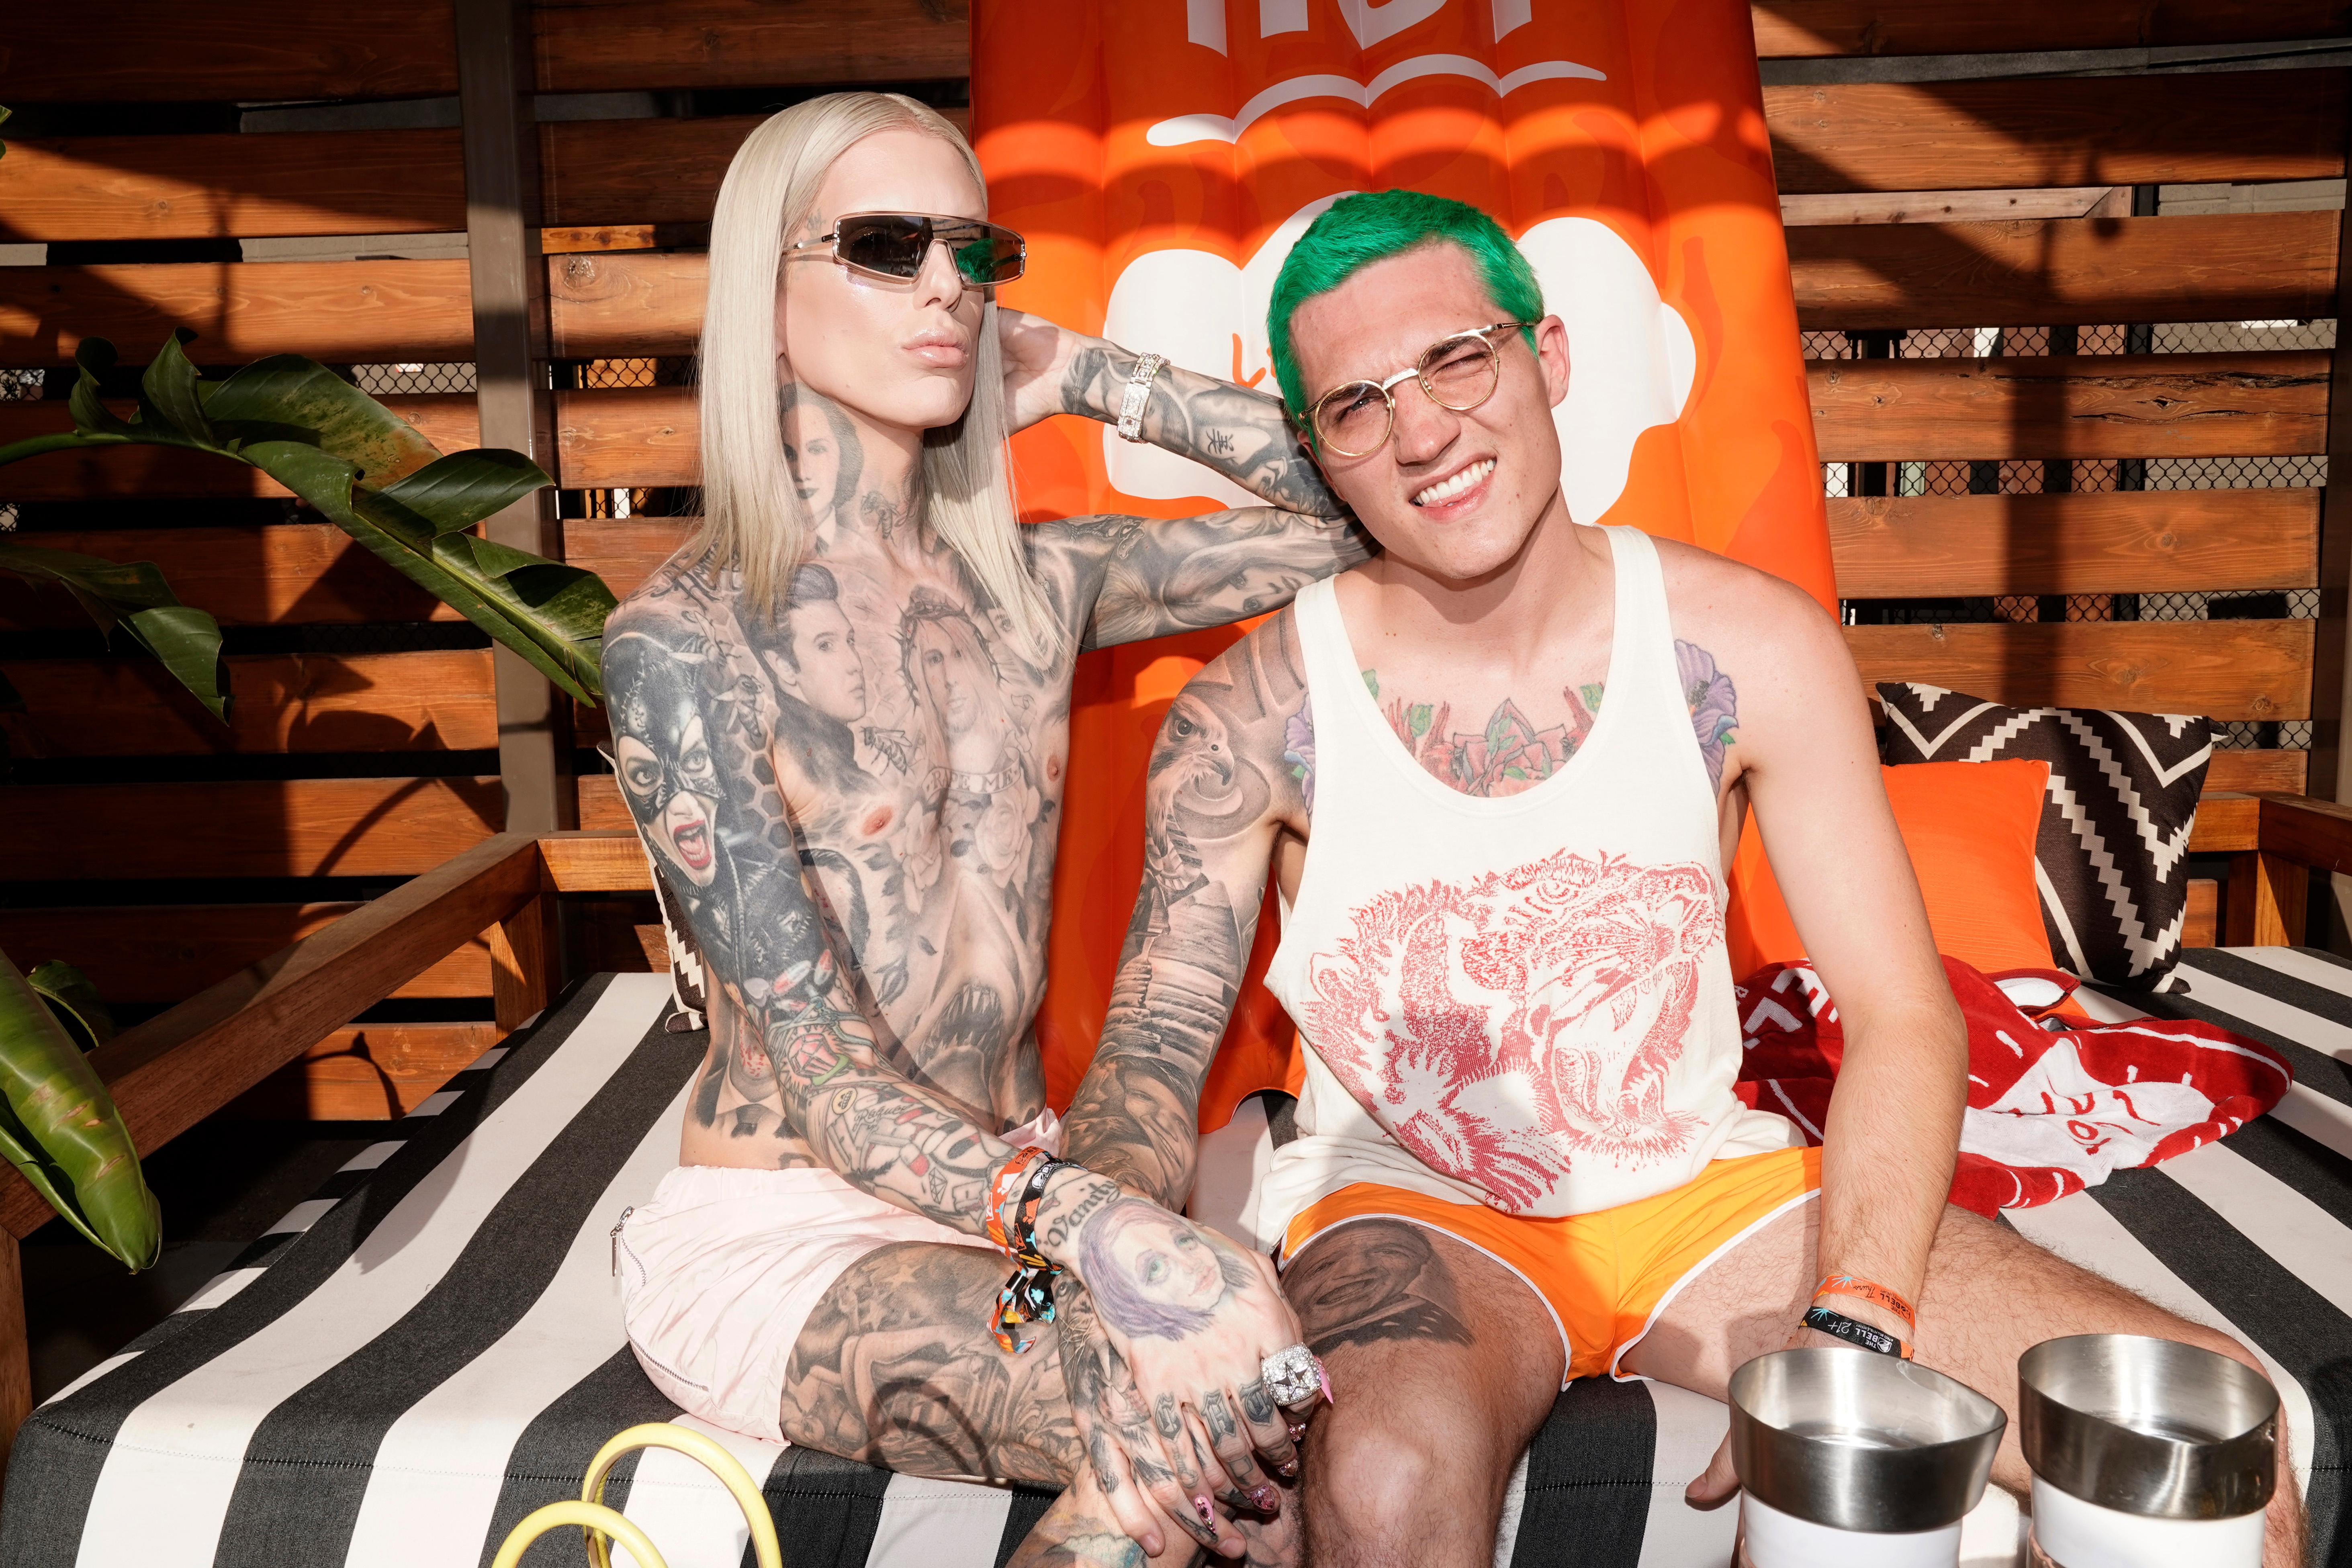 did jeffree and nathan break up feature